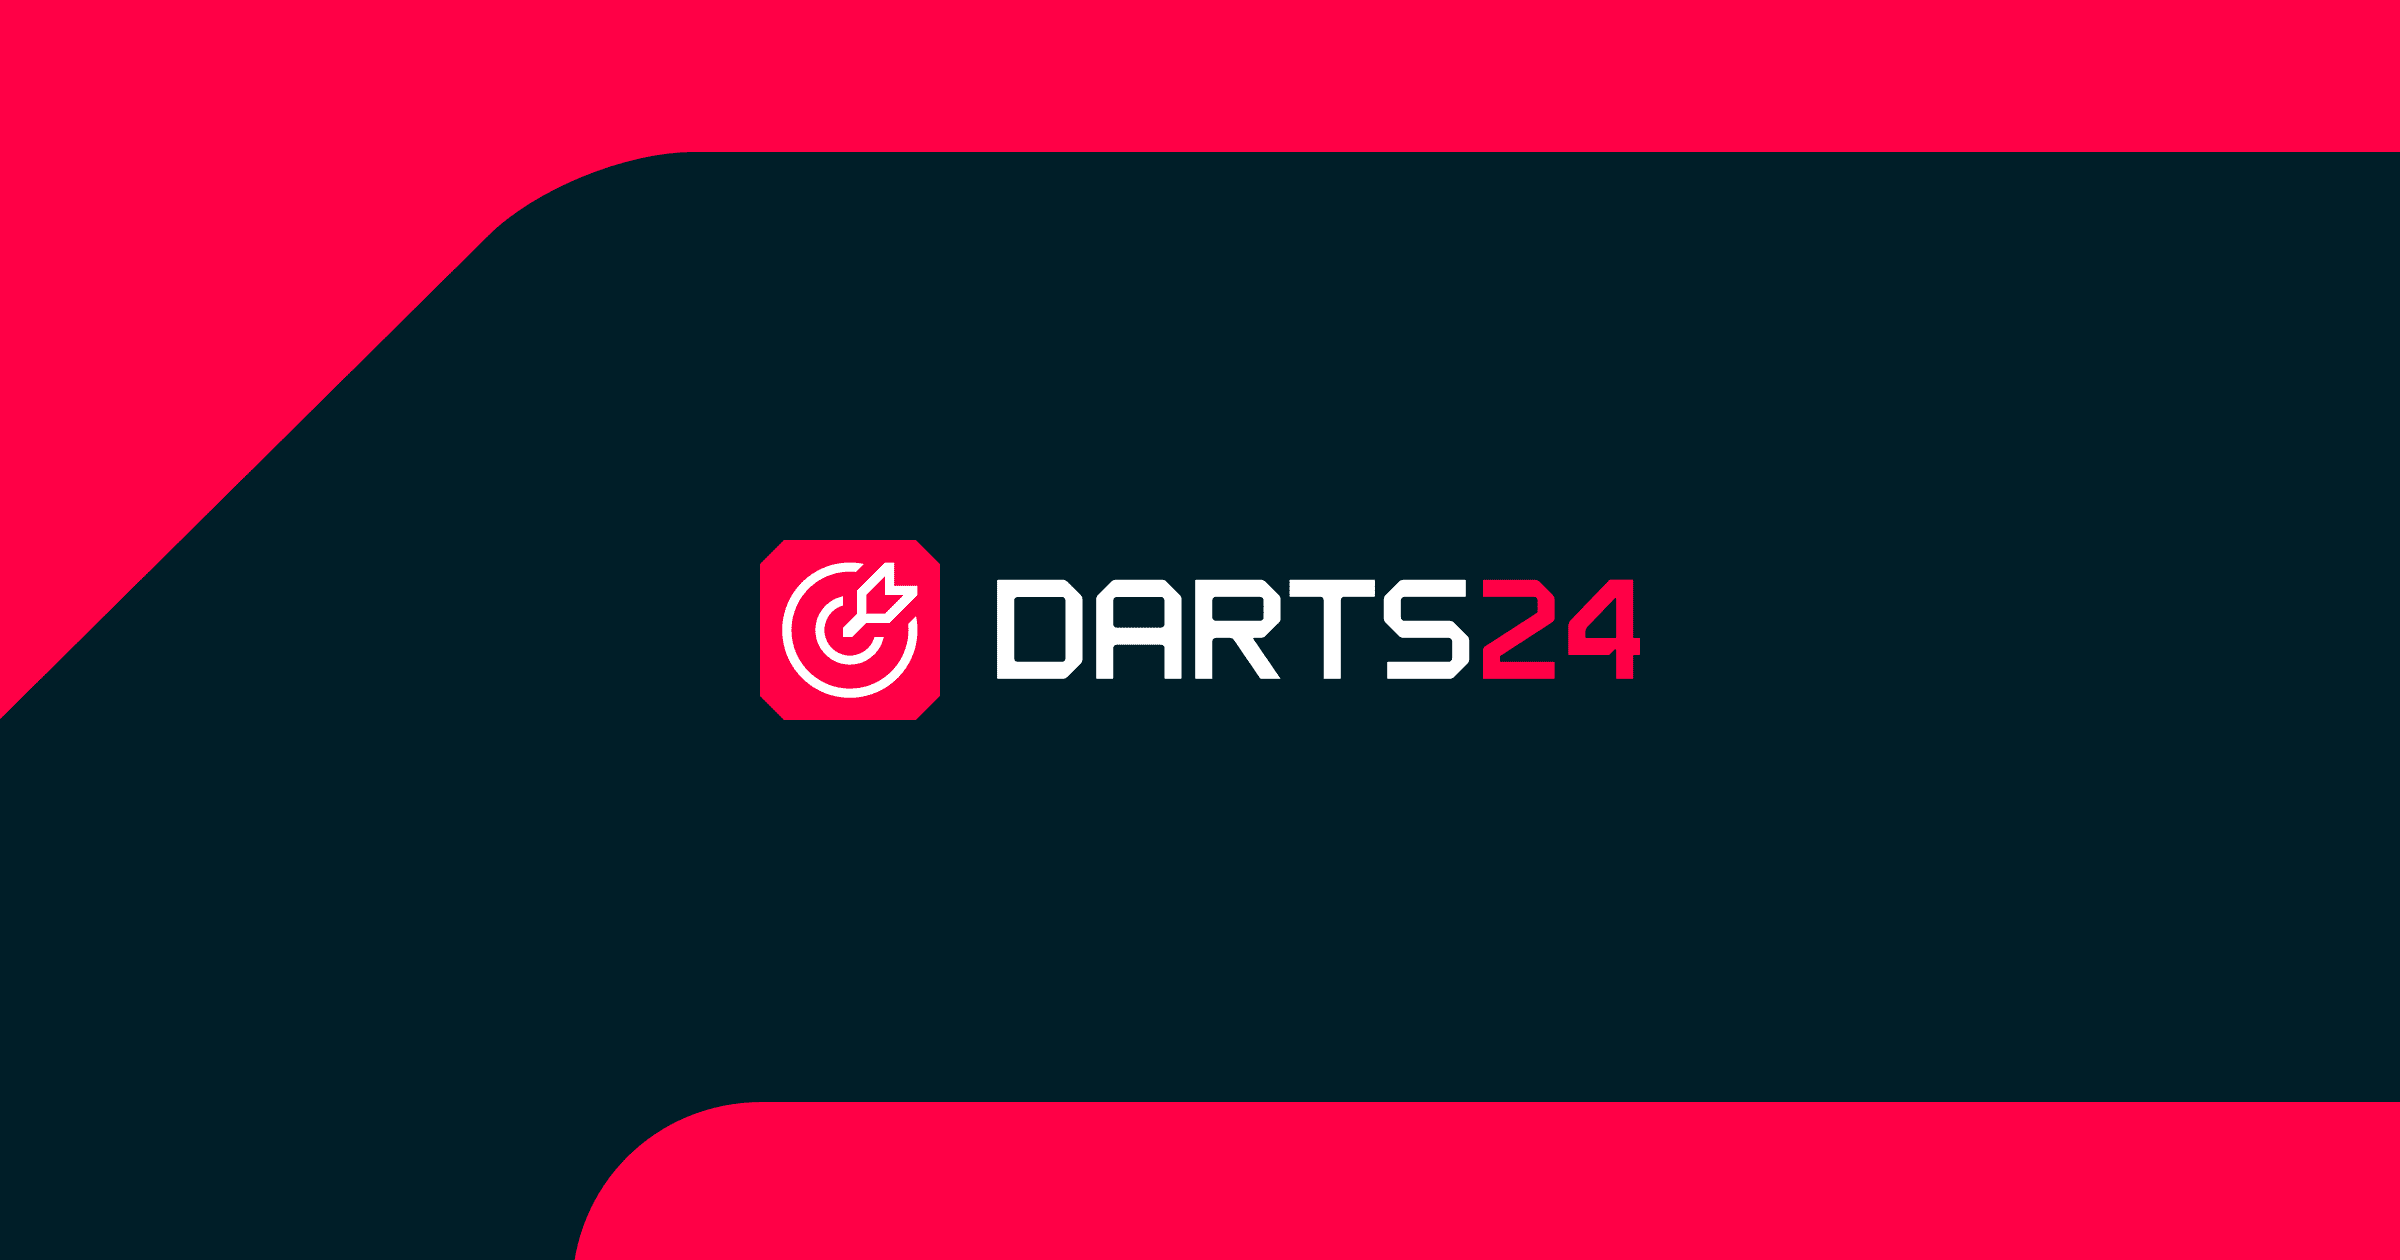 Darts 24 The Masters Live scores